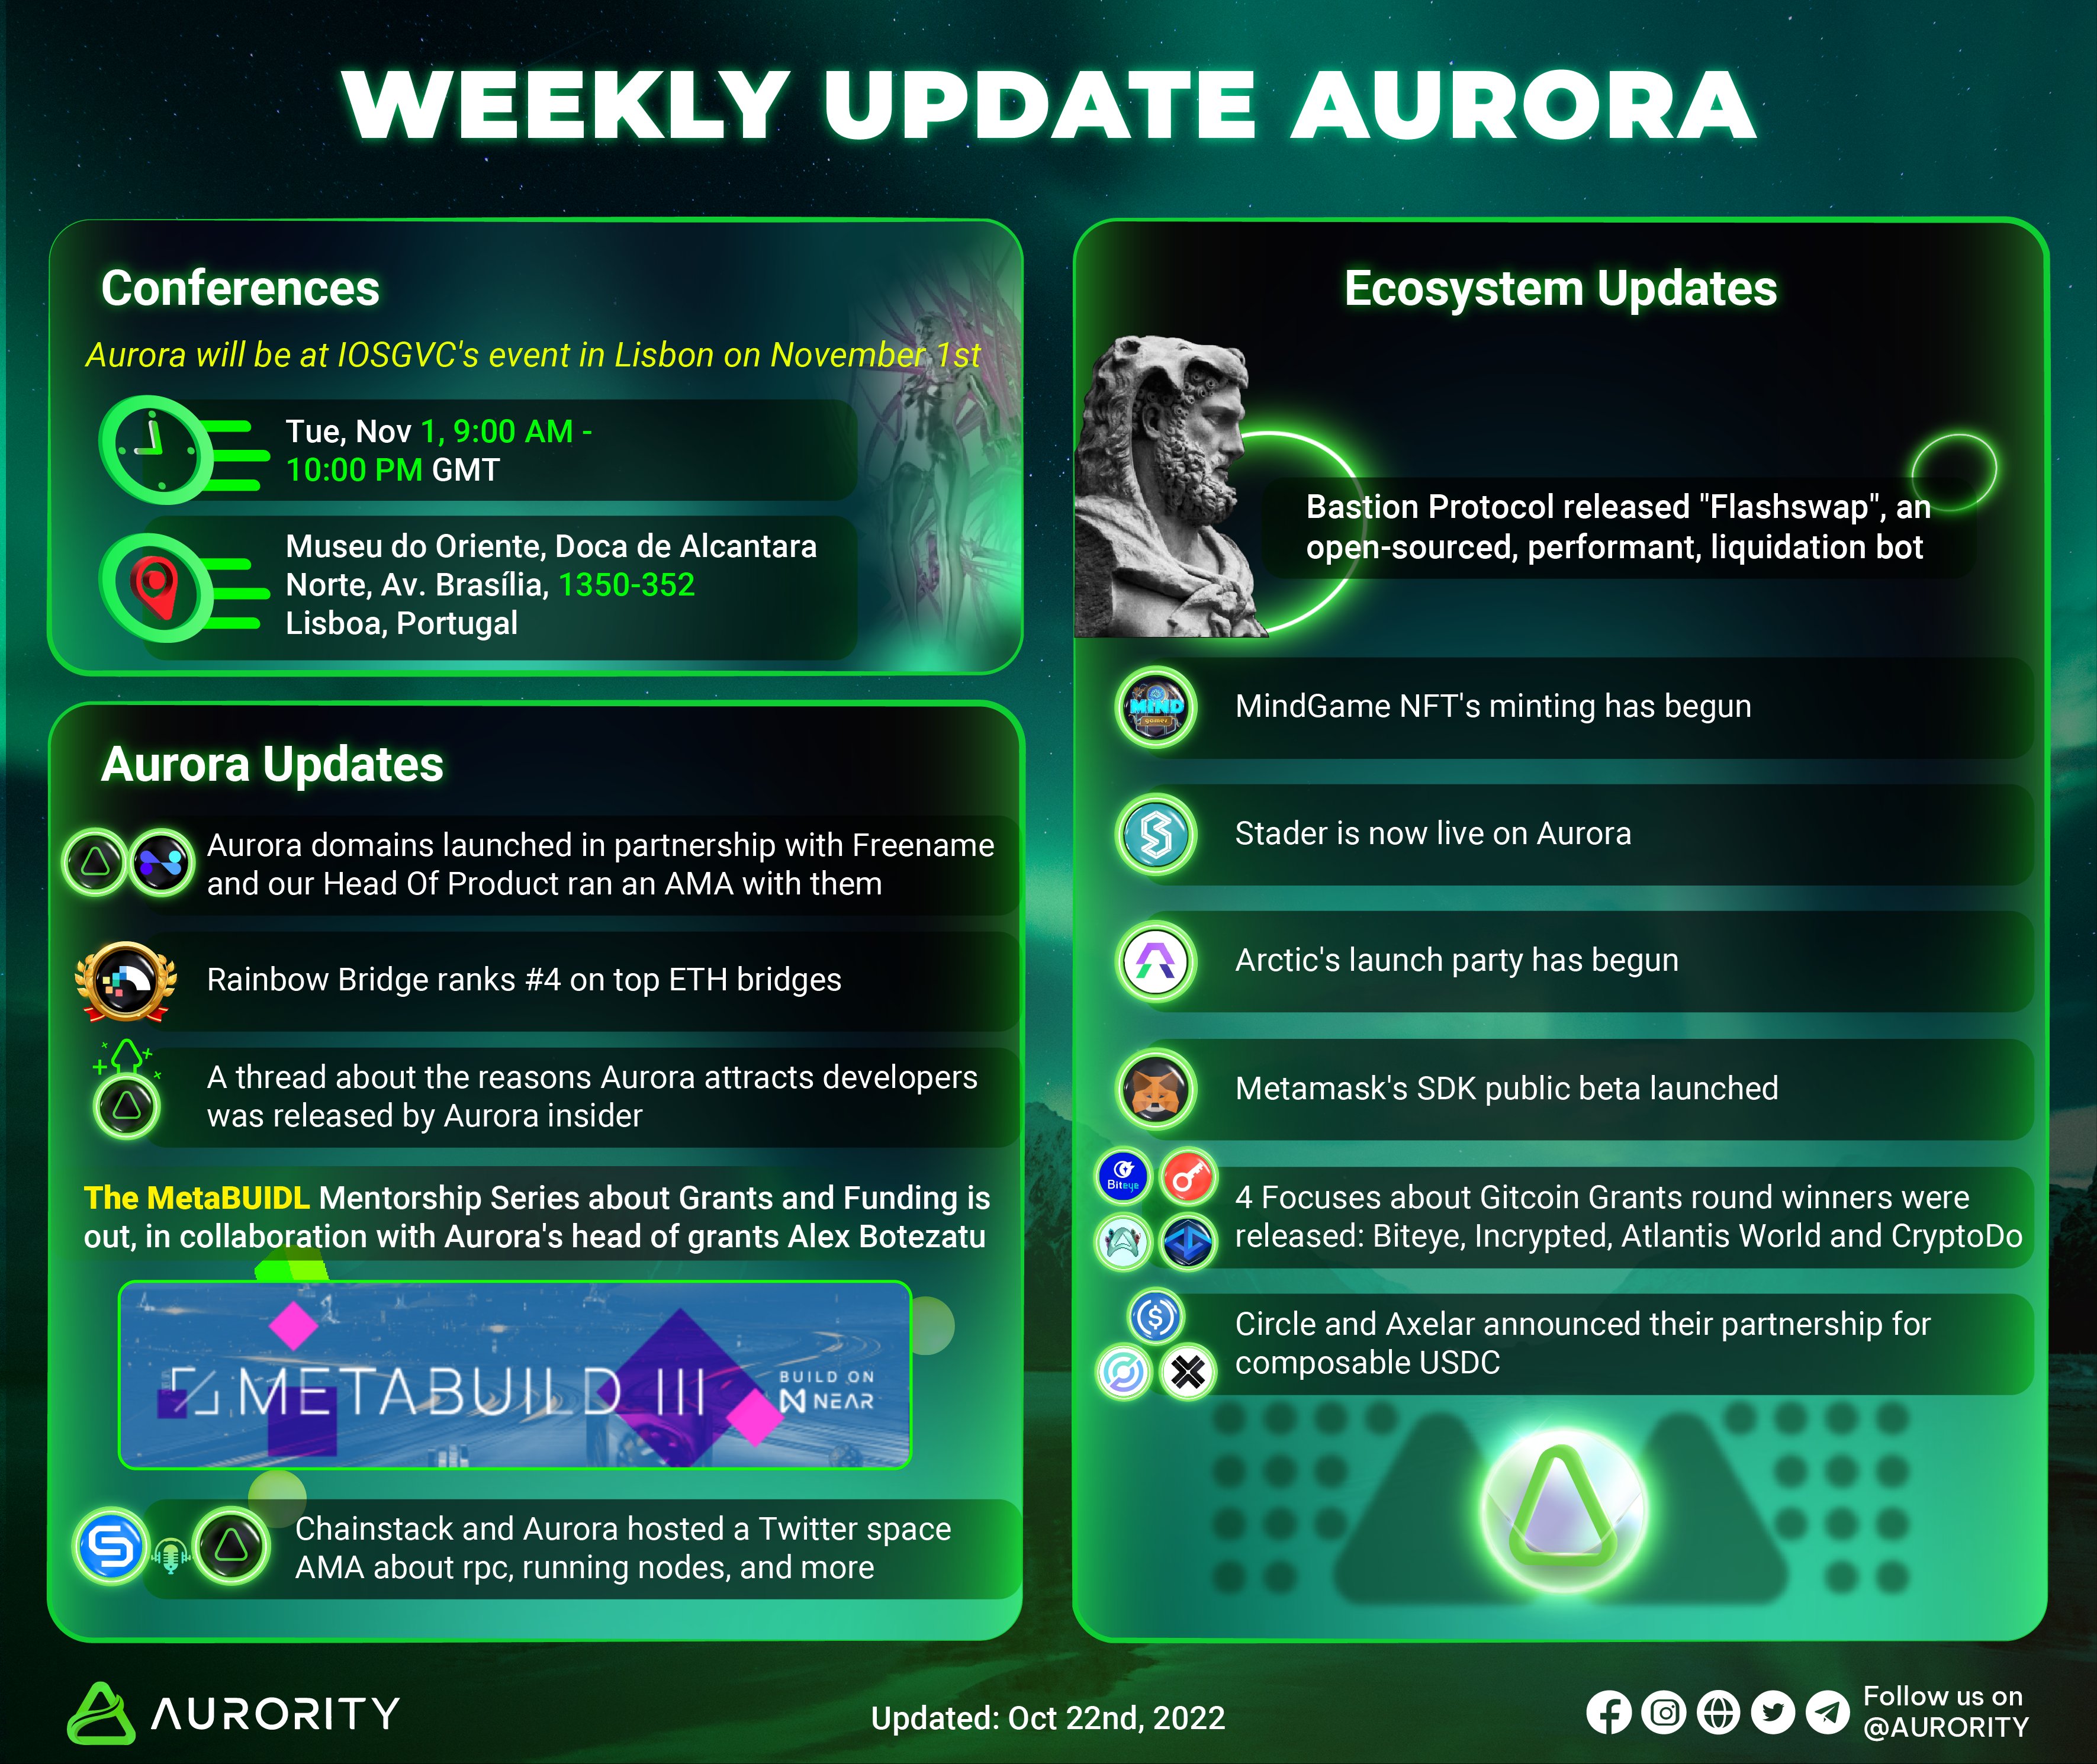 Let's take a look at Weekly Update from @auroraisnear Many important #Aurora events were announced in the week Some of the highlights of the ecosystem #MetaBUILD Mentorship Series, Episode 3: Grants & Funding https://aurora.dev/blog/weekly-update-2022-10-21 #Aurority $AURORA $NEAR #NEAR